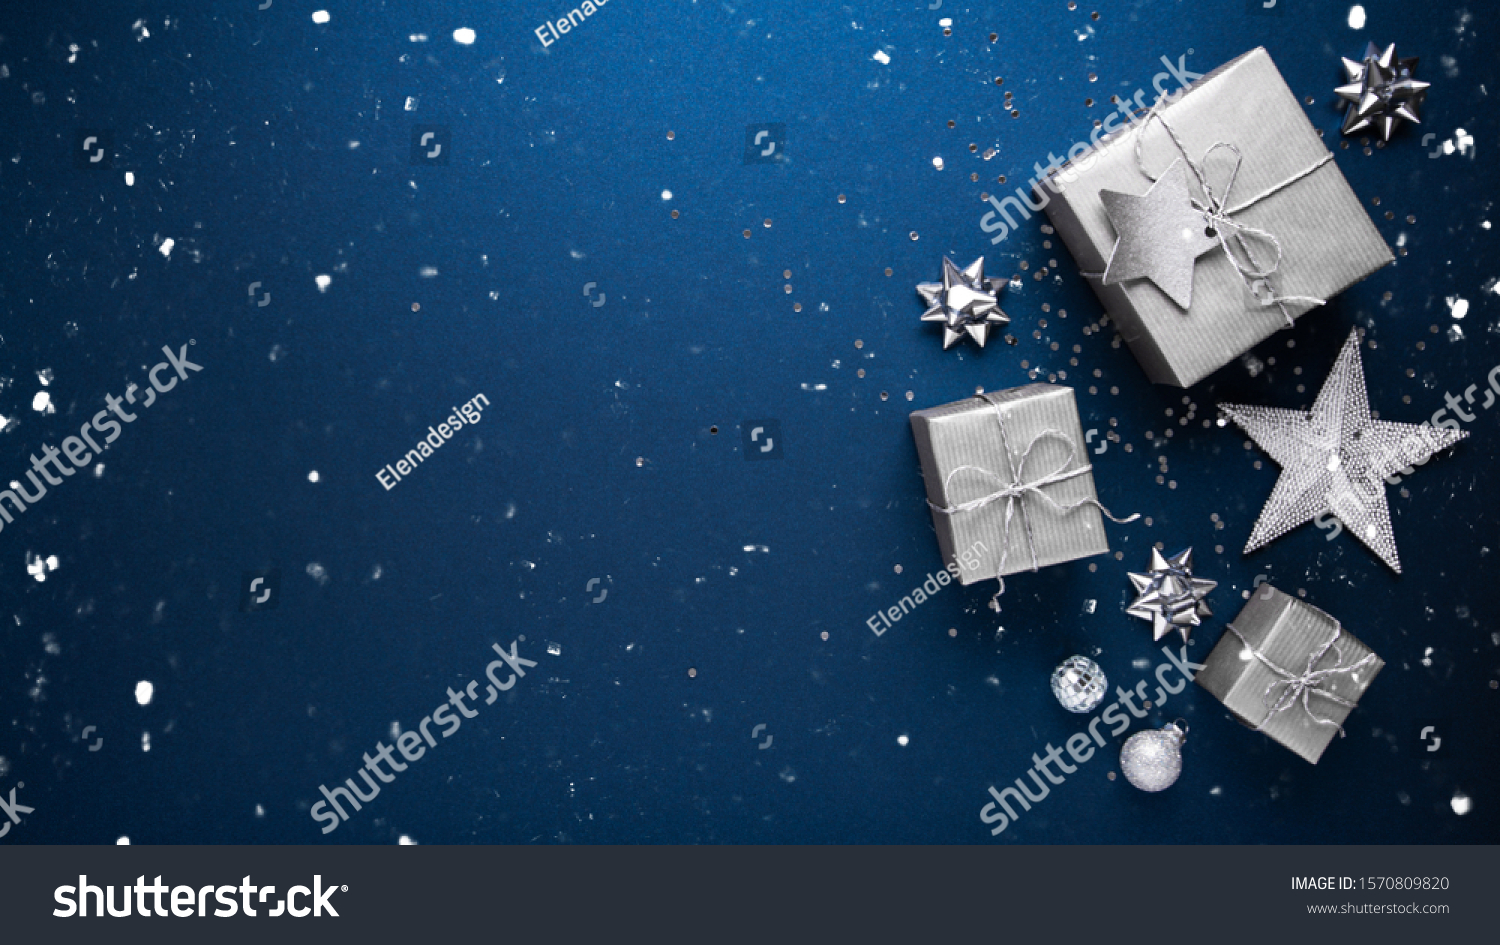 Merry Christmas and Happy Holidays greeting card, frame, banner. New Year. Noel. Silver Christmas gifts, ornaments on blue background top view. Winter holiday xmas theme. Flat lay. #1570809820